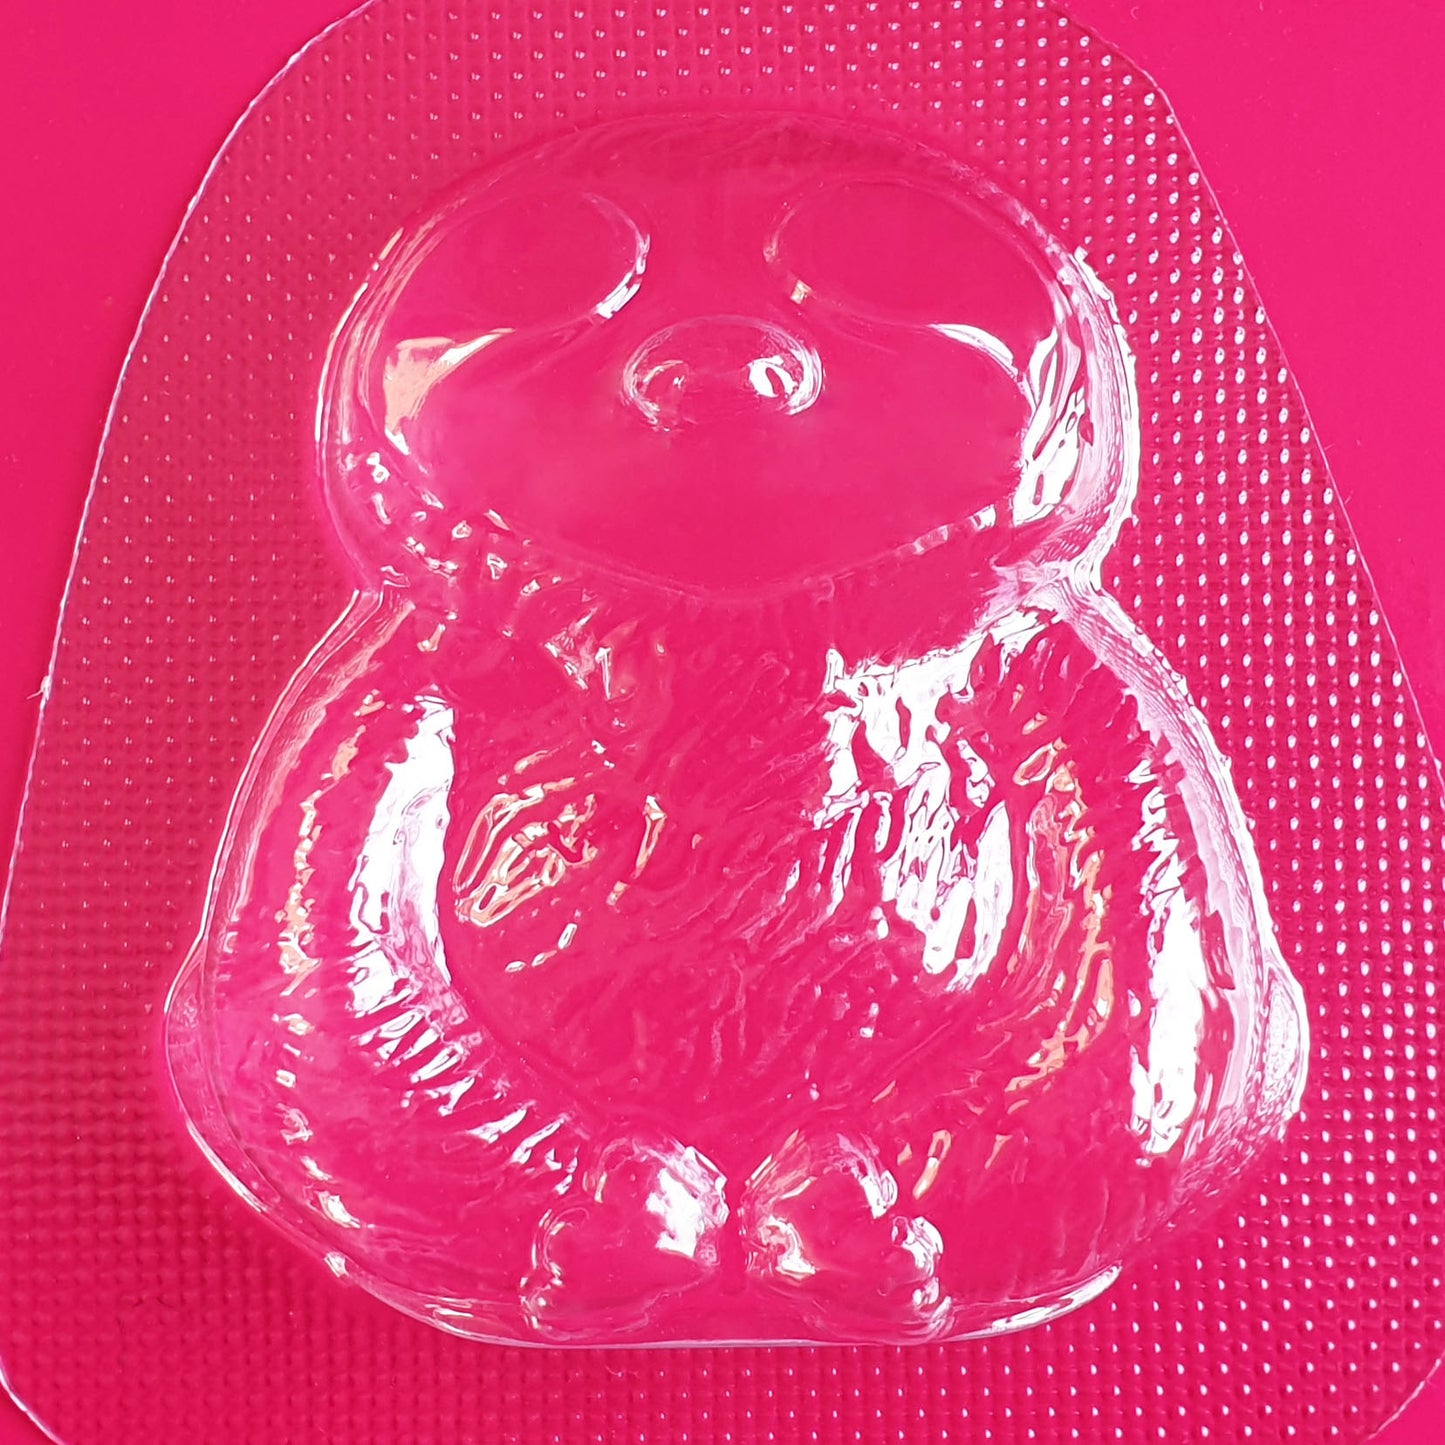 Sloth XL Mould | Truly Personal | Bath Bomb, Soap, Resin, Chocolate, Jelly, Wax Melts Mold